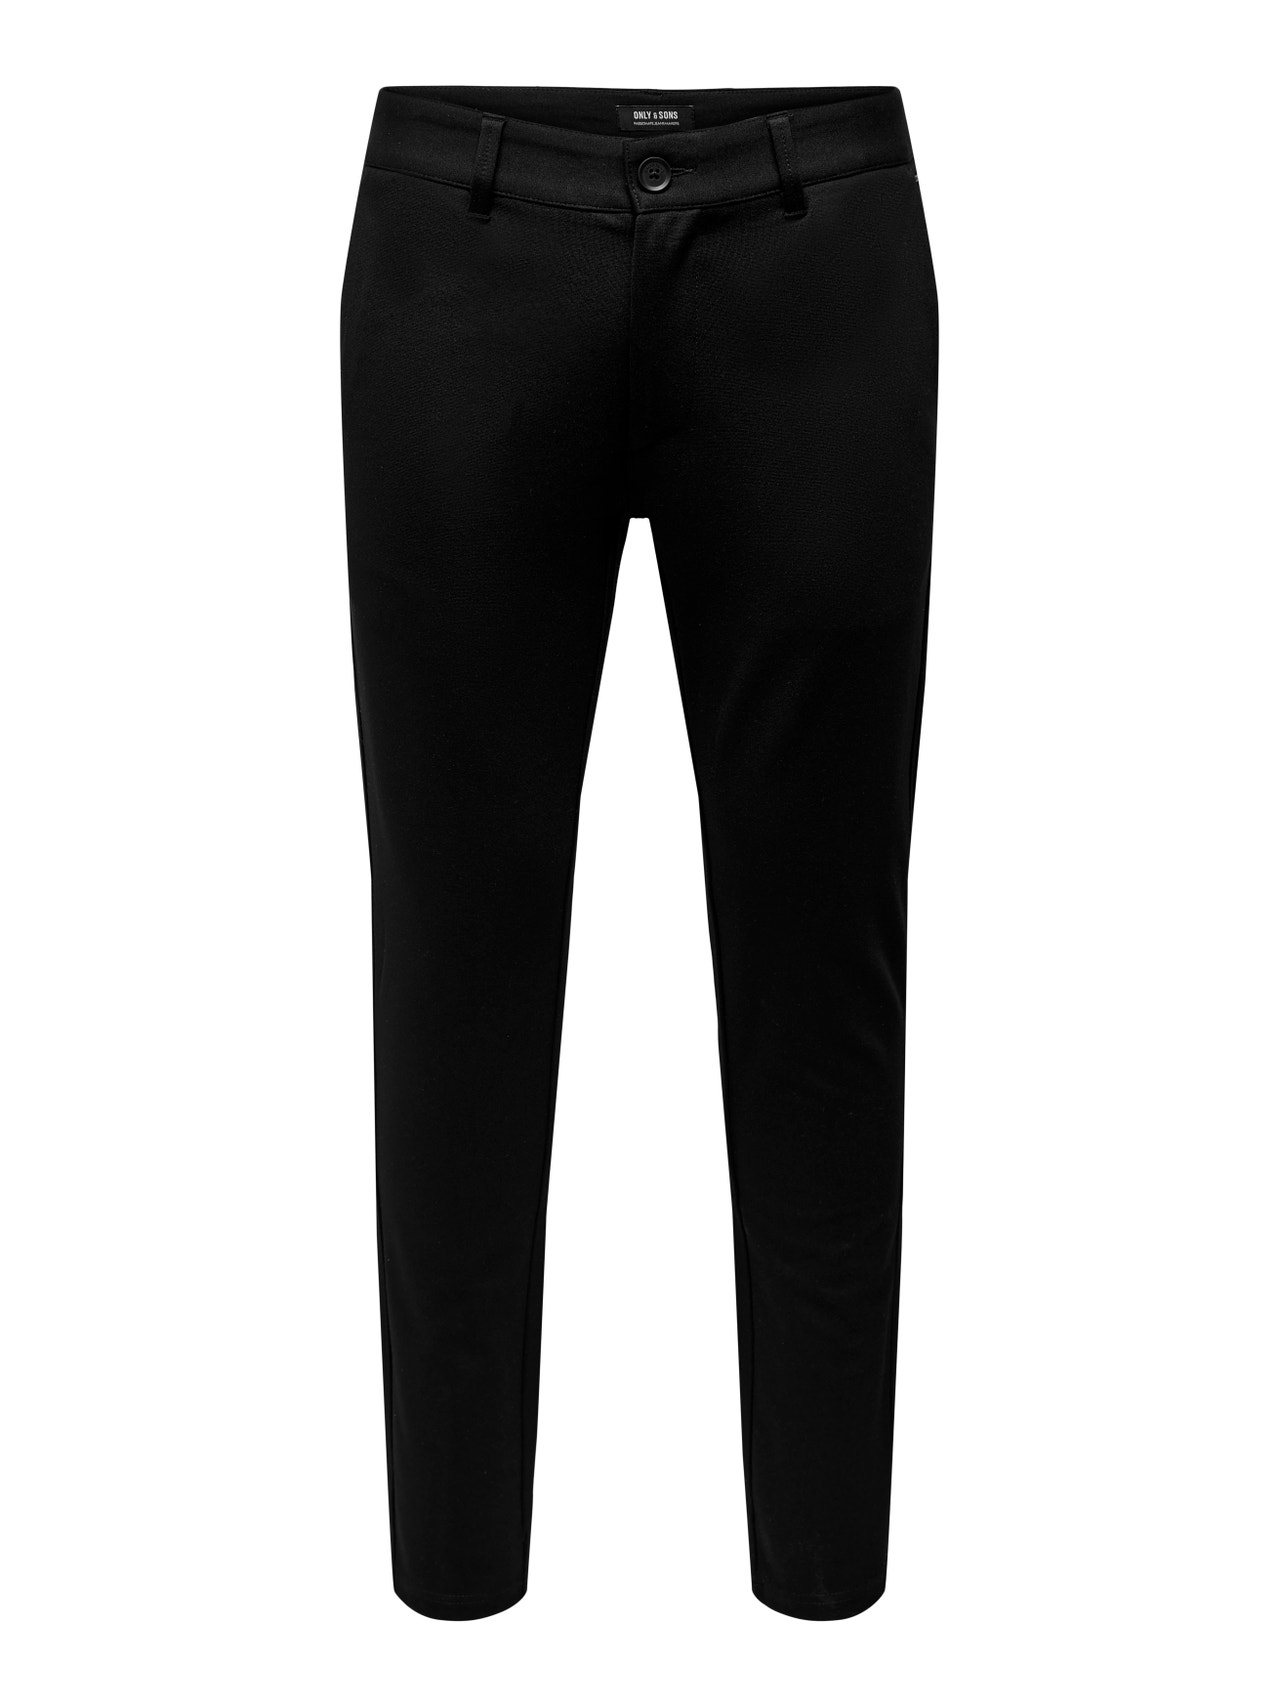 ONLY & SONS Tapered fit - Cropped Mid waist Trousers -Black - 22025747